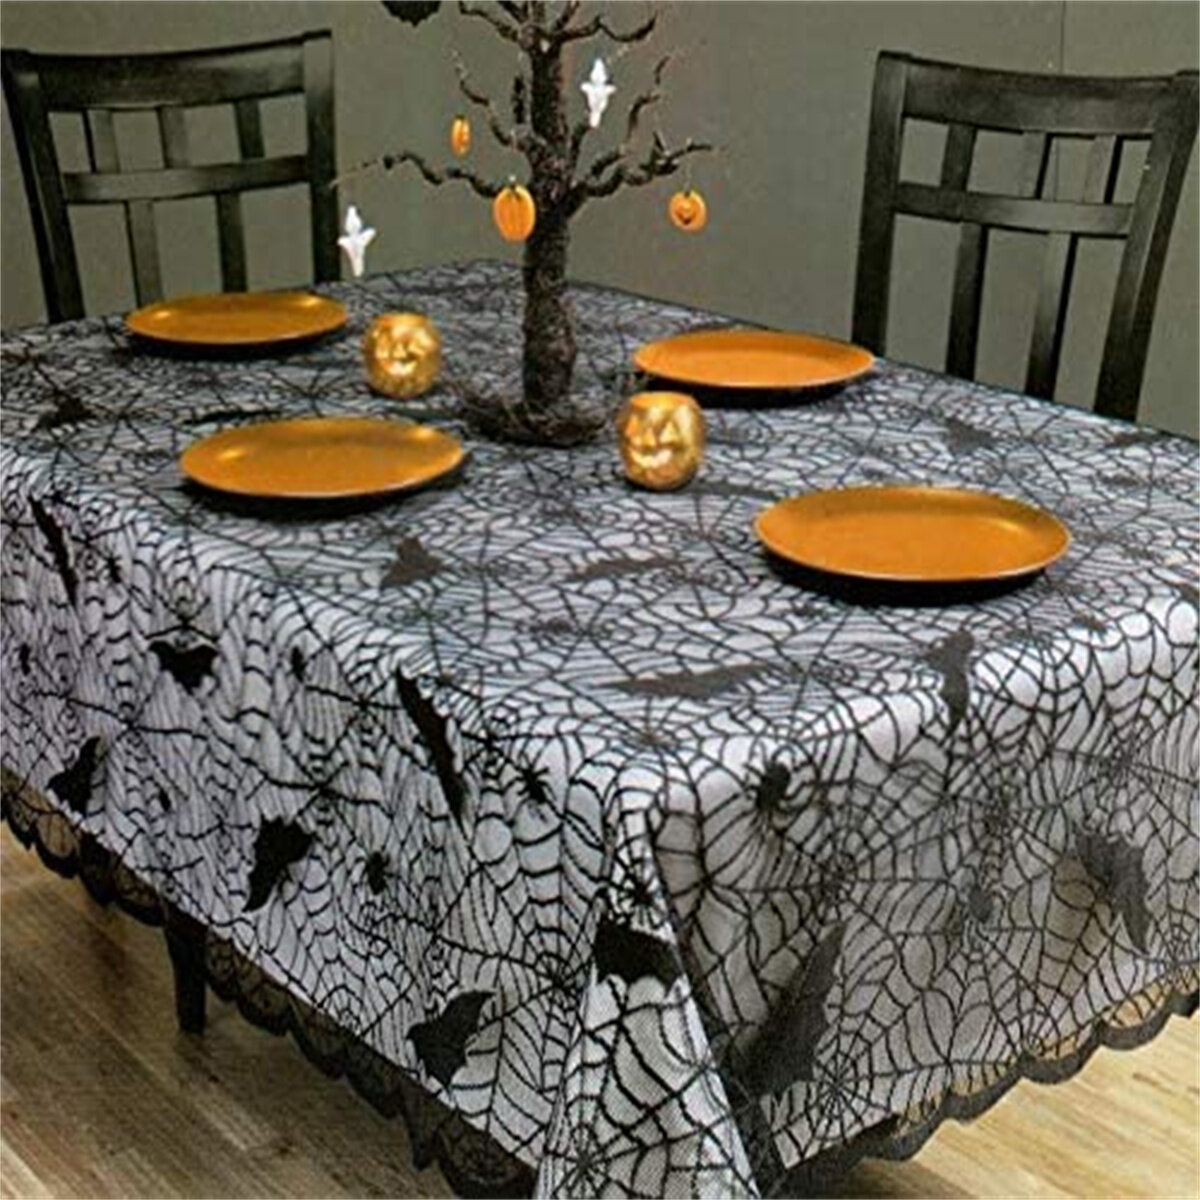 Halloween Spider Web Table Runner Black Lace Tablecloth Cover Party Table Decor 